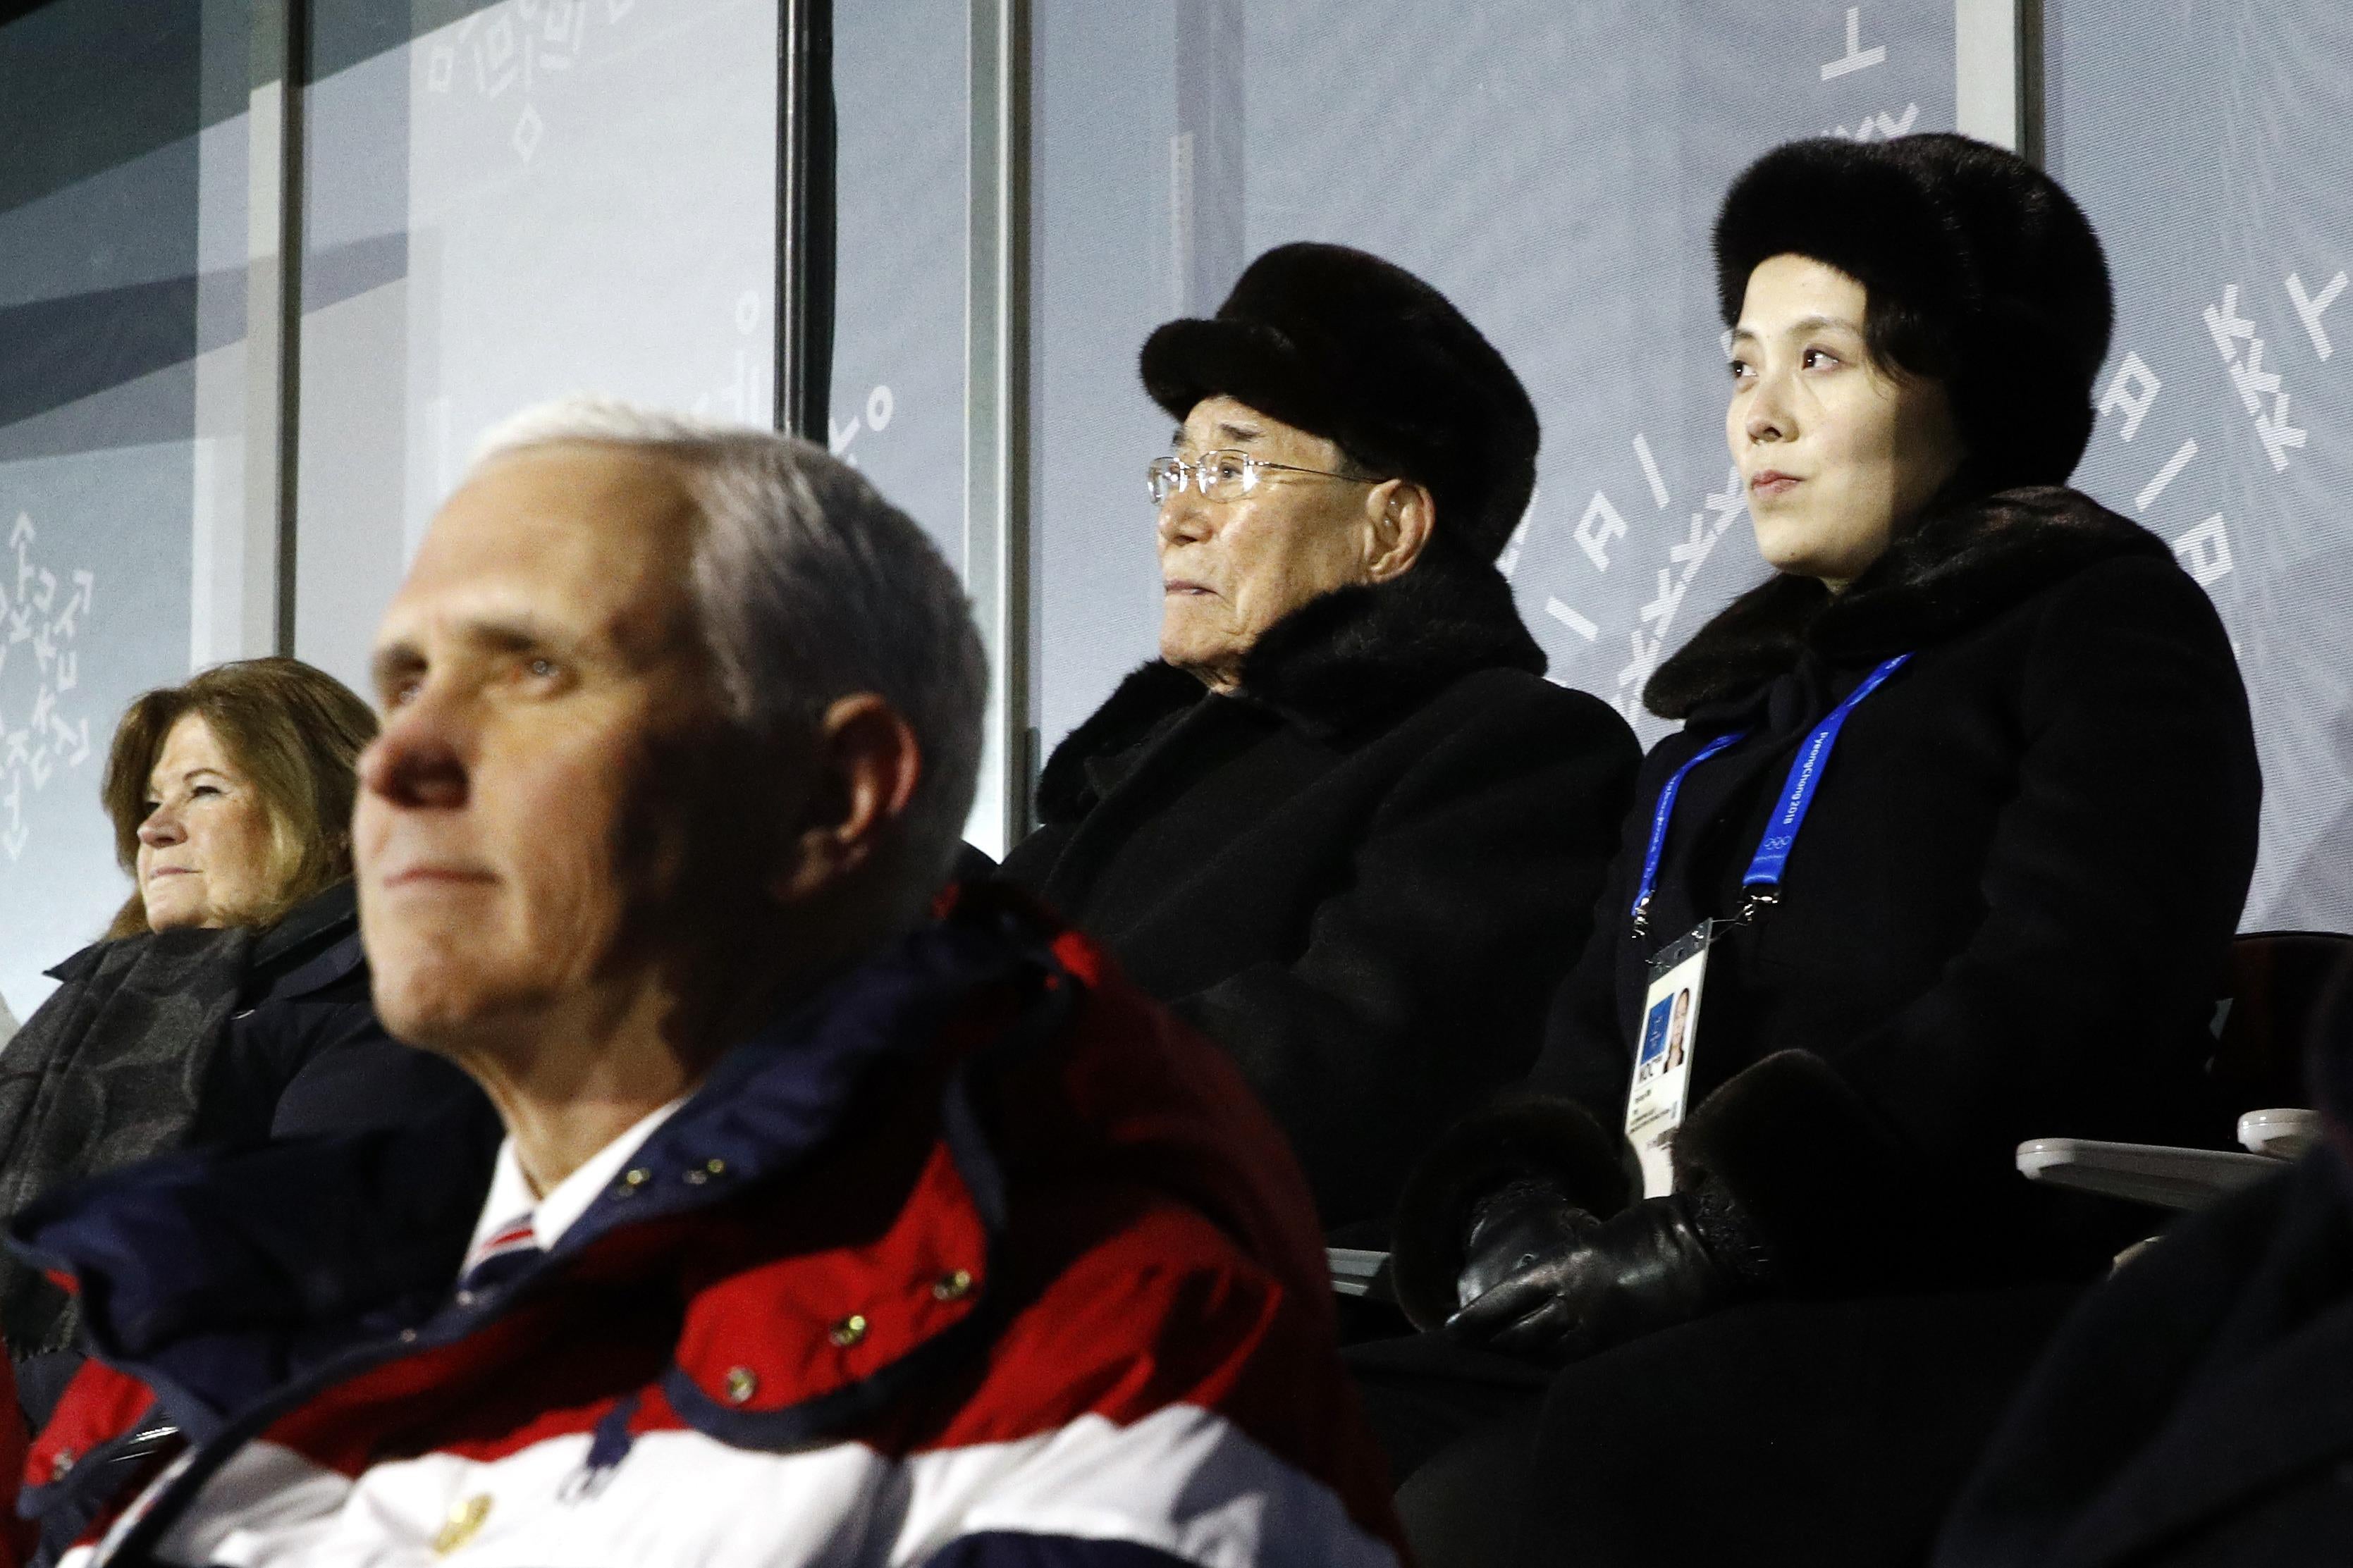 PYEONGCHANG-GUN, SOUTH KOREA - FEBRUARY 09:  Kim Yo Jong, top right, sister of North Korean leader Kim Jong Un, sits alongside Kim Yong Nam, president of the Presidium of North Korean Parliament, and behind U.S. Vice President Mike Pence as she watches the opening ceremony of the 2018 Winter Olympics at PyeongChang Olympic Stadium on February 9, 2018 in Pyeongchang-gun, South Korea.  (Photo by Patrick Semansky - Pool /Getty Images)